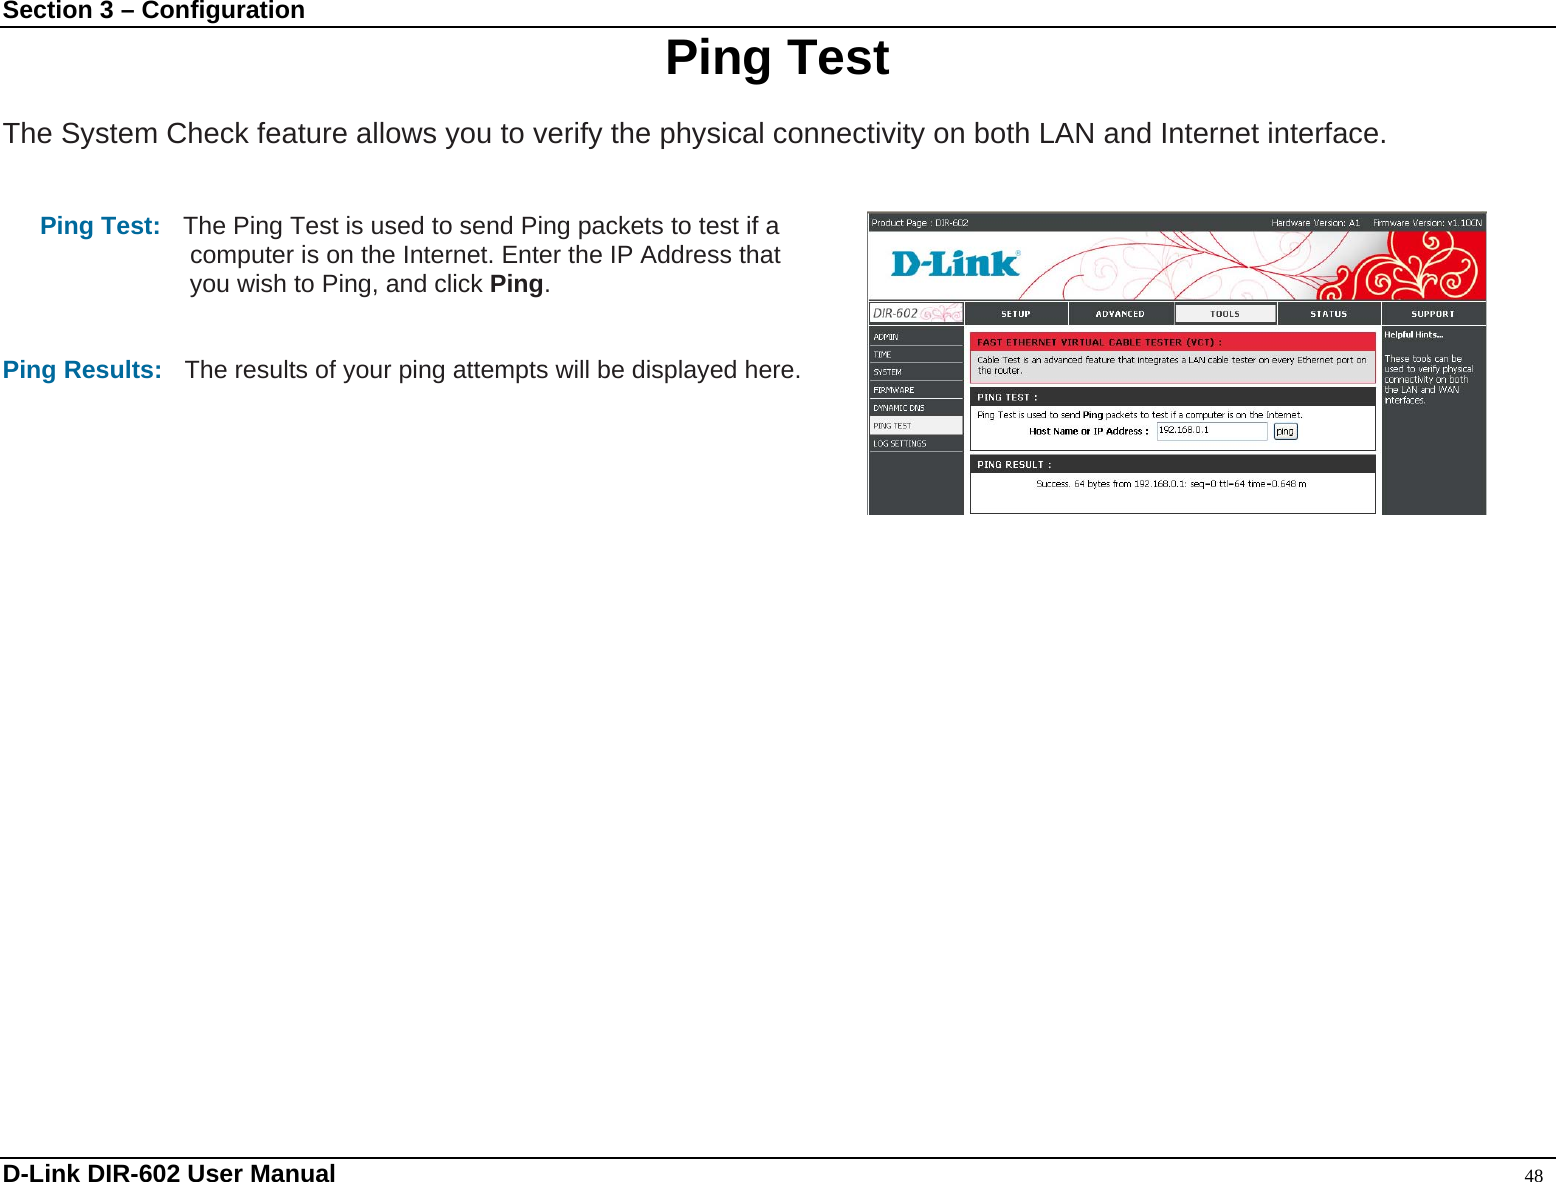 Section 3 – Configuration  Ping Test  The System Check feature allows you to verify the physical connectivity on both LAN and Internet interface.   Ping Test:    The Ping Test is used to send Ping packets to test if a   computer is on the Internet. Enter the IP Address that you wish to Ping, and click Ping.   Ping Results:    The results of your ping attempts will be displayed here.          D-Link DIR-602 User Manual                                                                                               48 